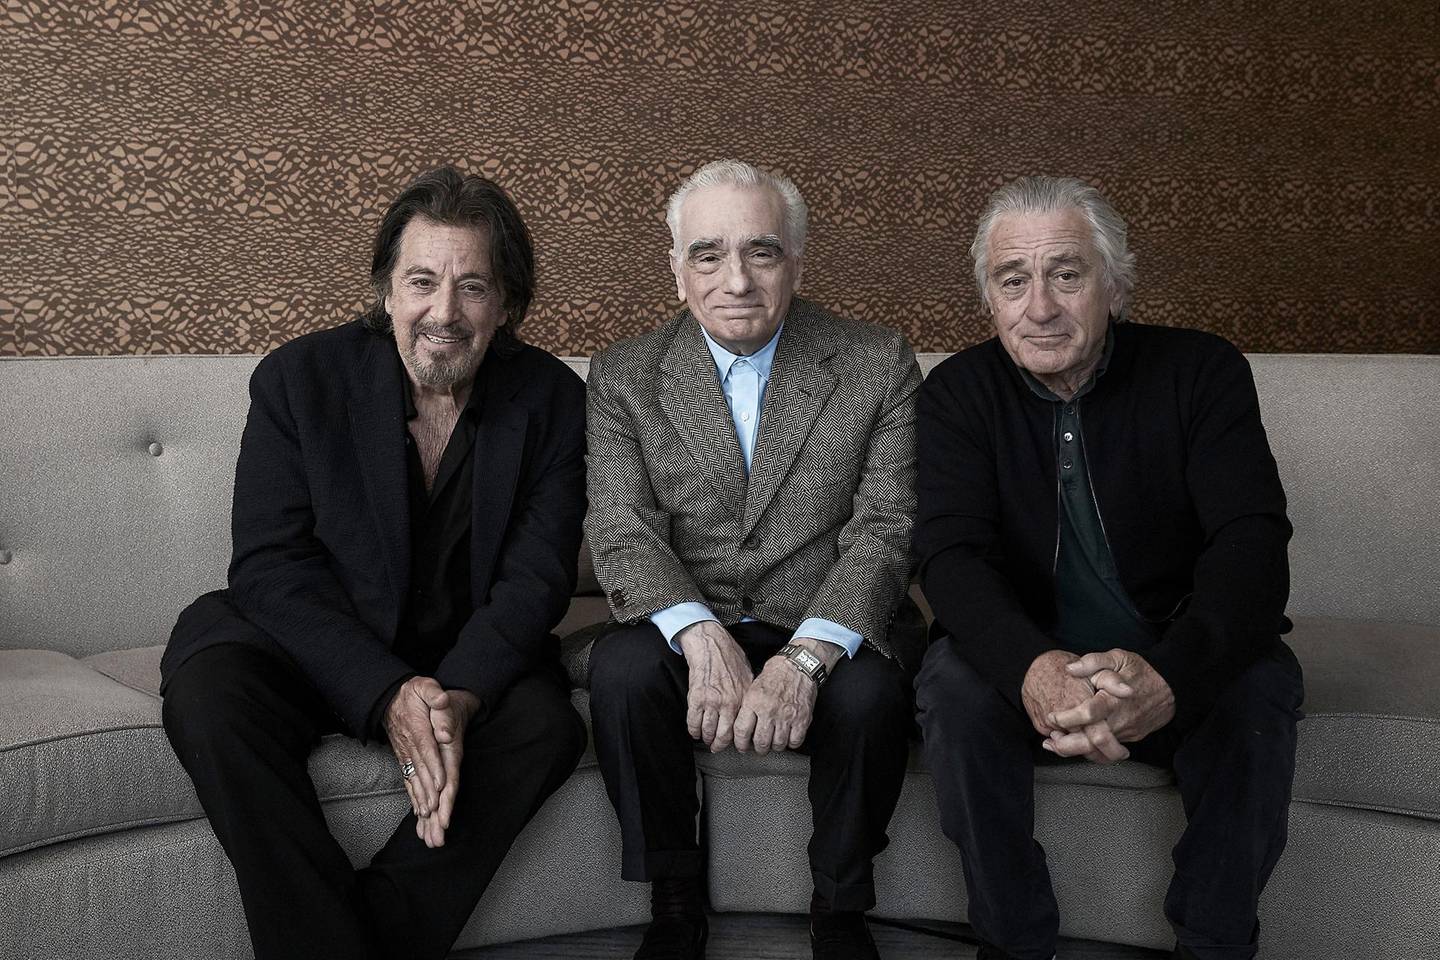 This Sept. 30, 2019 photo shows actor Al Pacino, from left, director Martin Scorsese, and actor Robert De Niro posing for a portrait to promote their upcoming film "The Irishman" in New York. (Photo by Victoria Will/Invision/AP)